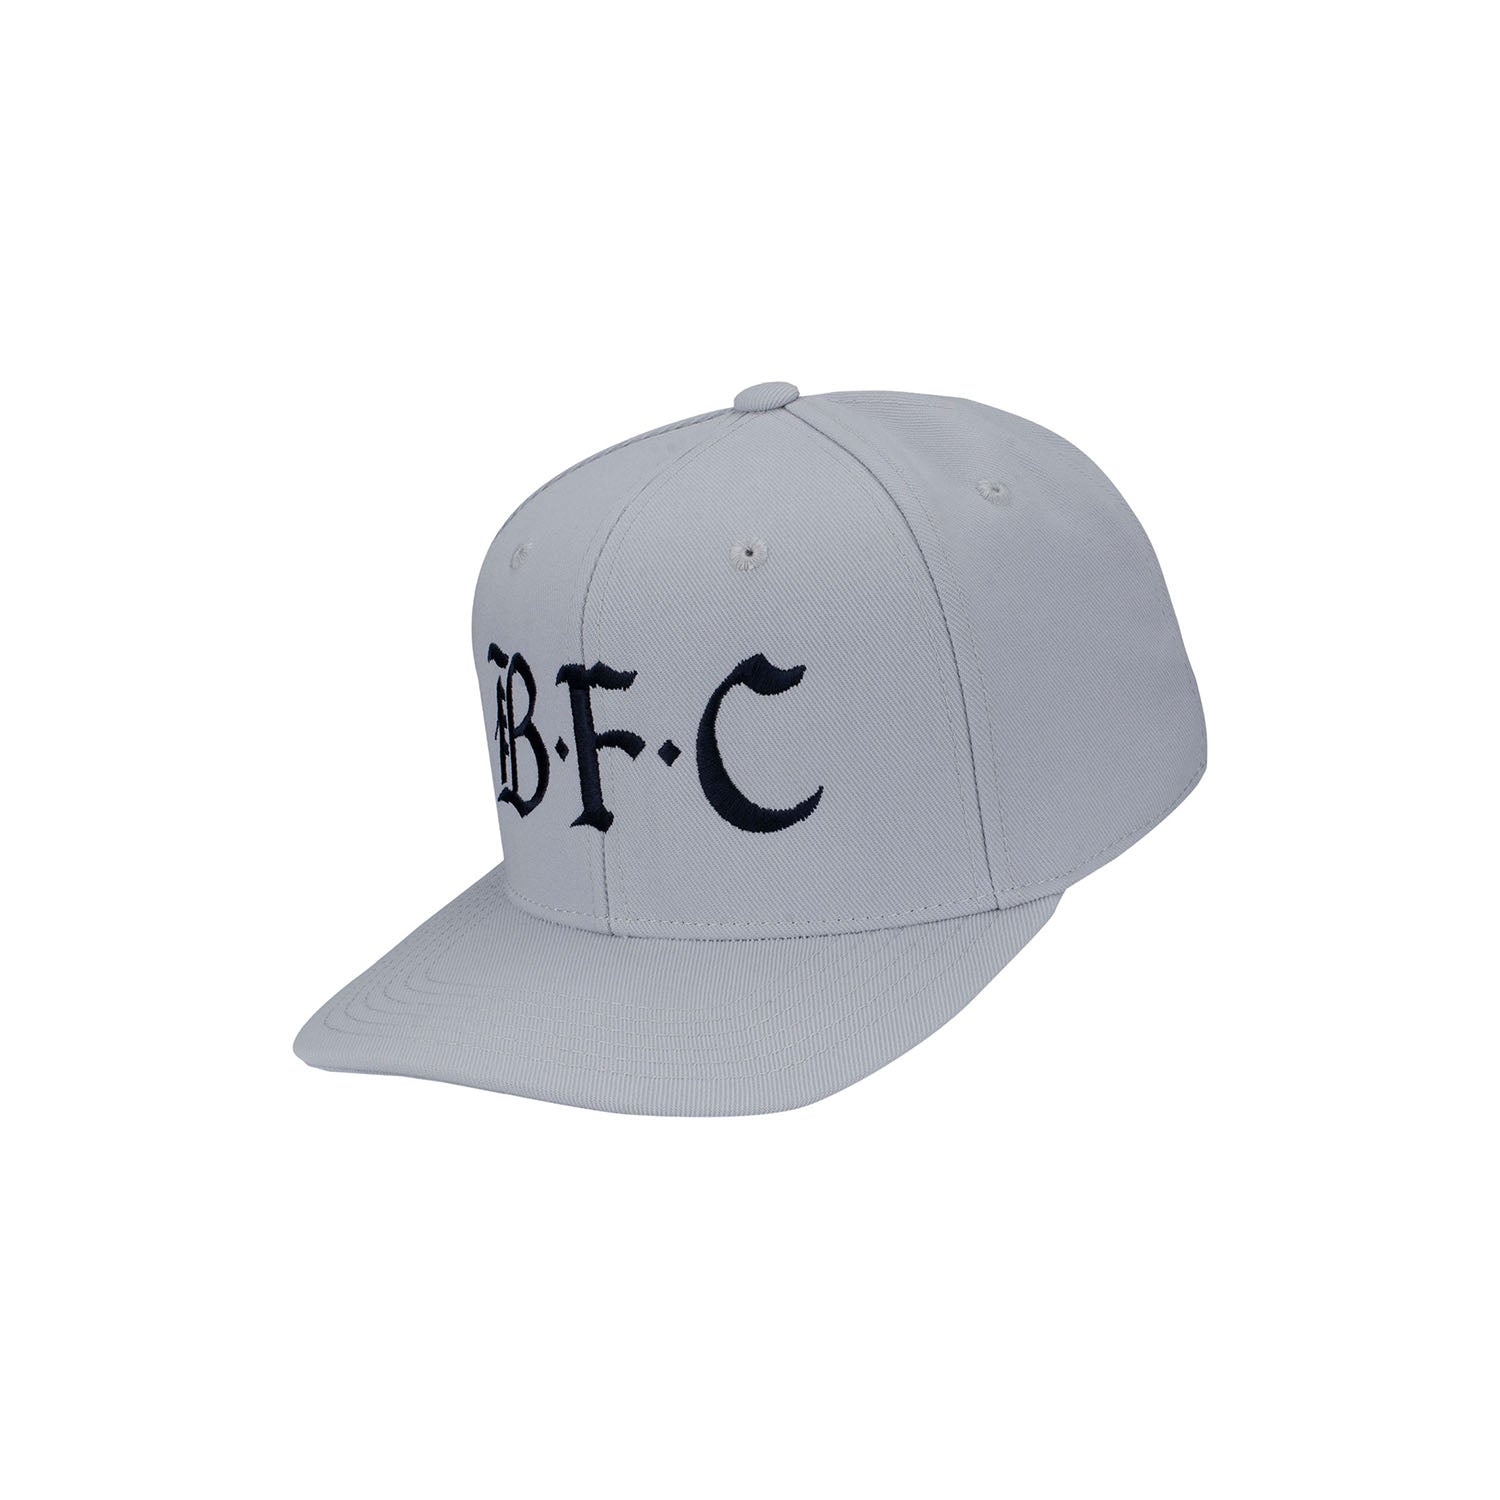 Unisex Bay FC Grey Hat - Angled Left Side View